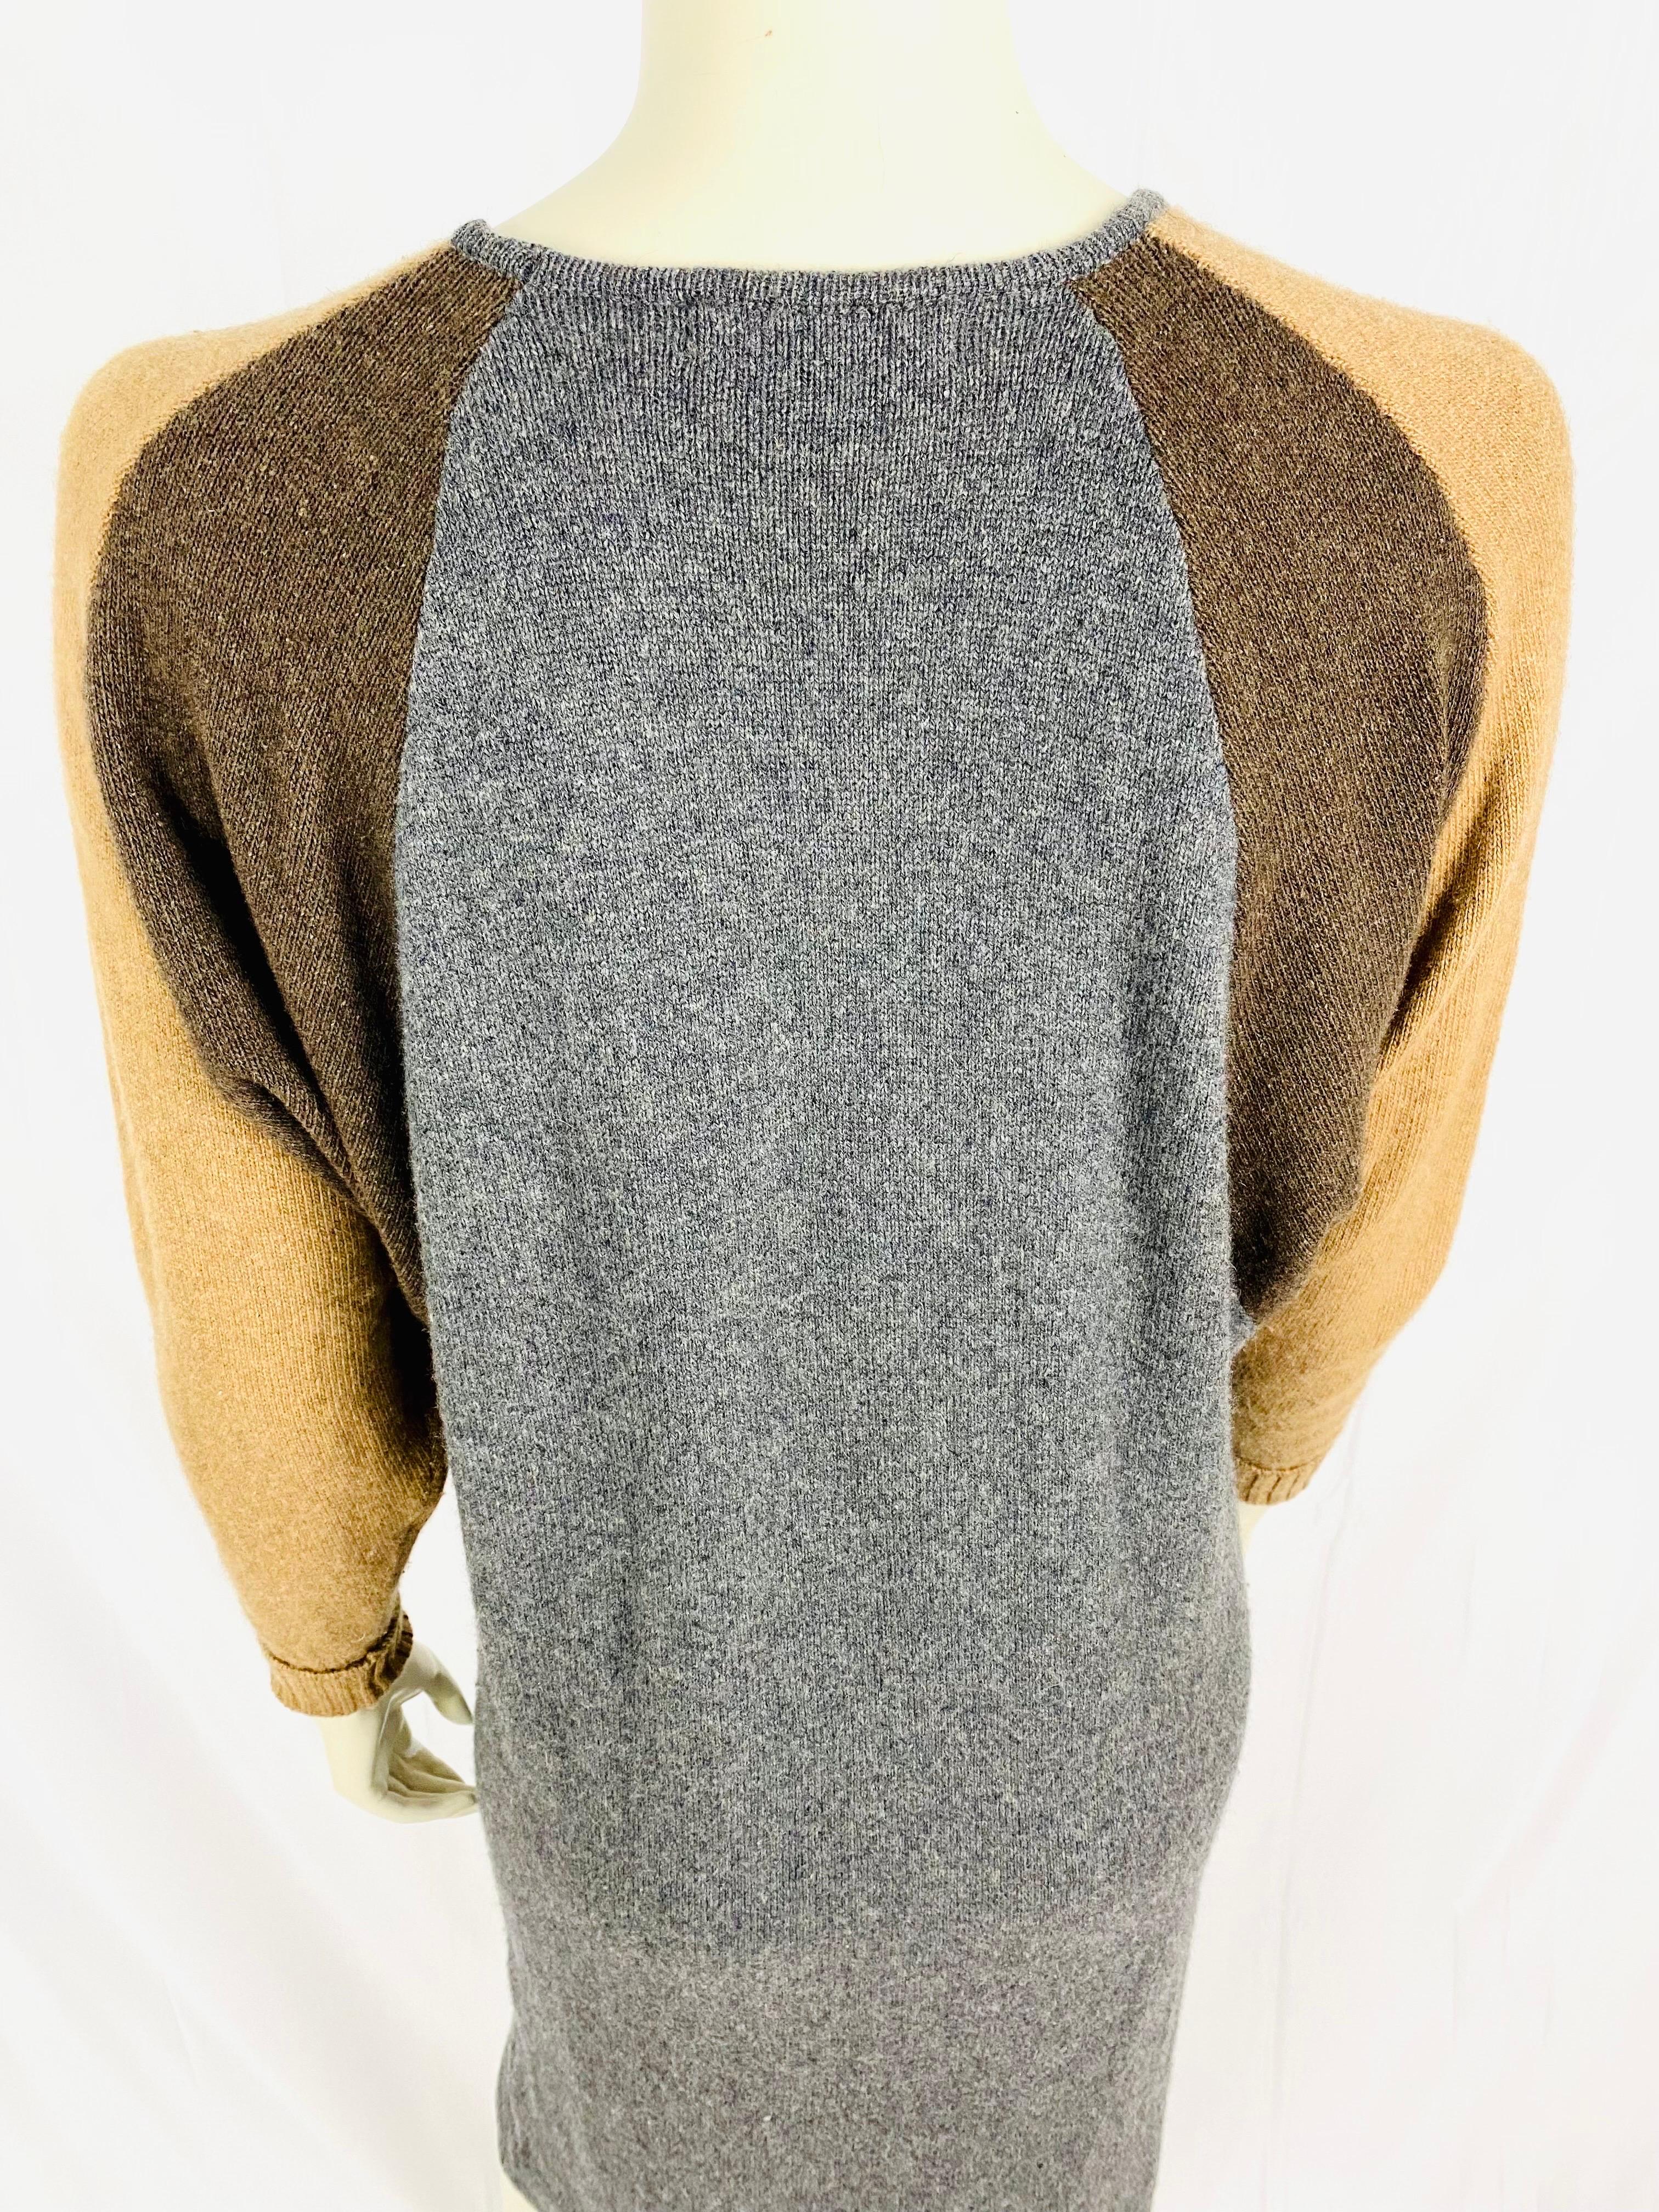 Vintage Issey Miyake cashmere sweater dress from 1980 For Sale 2